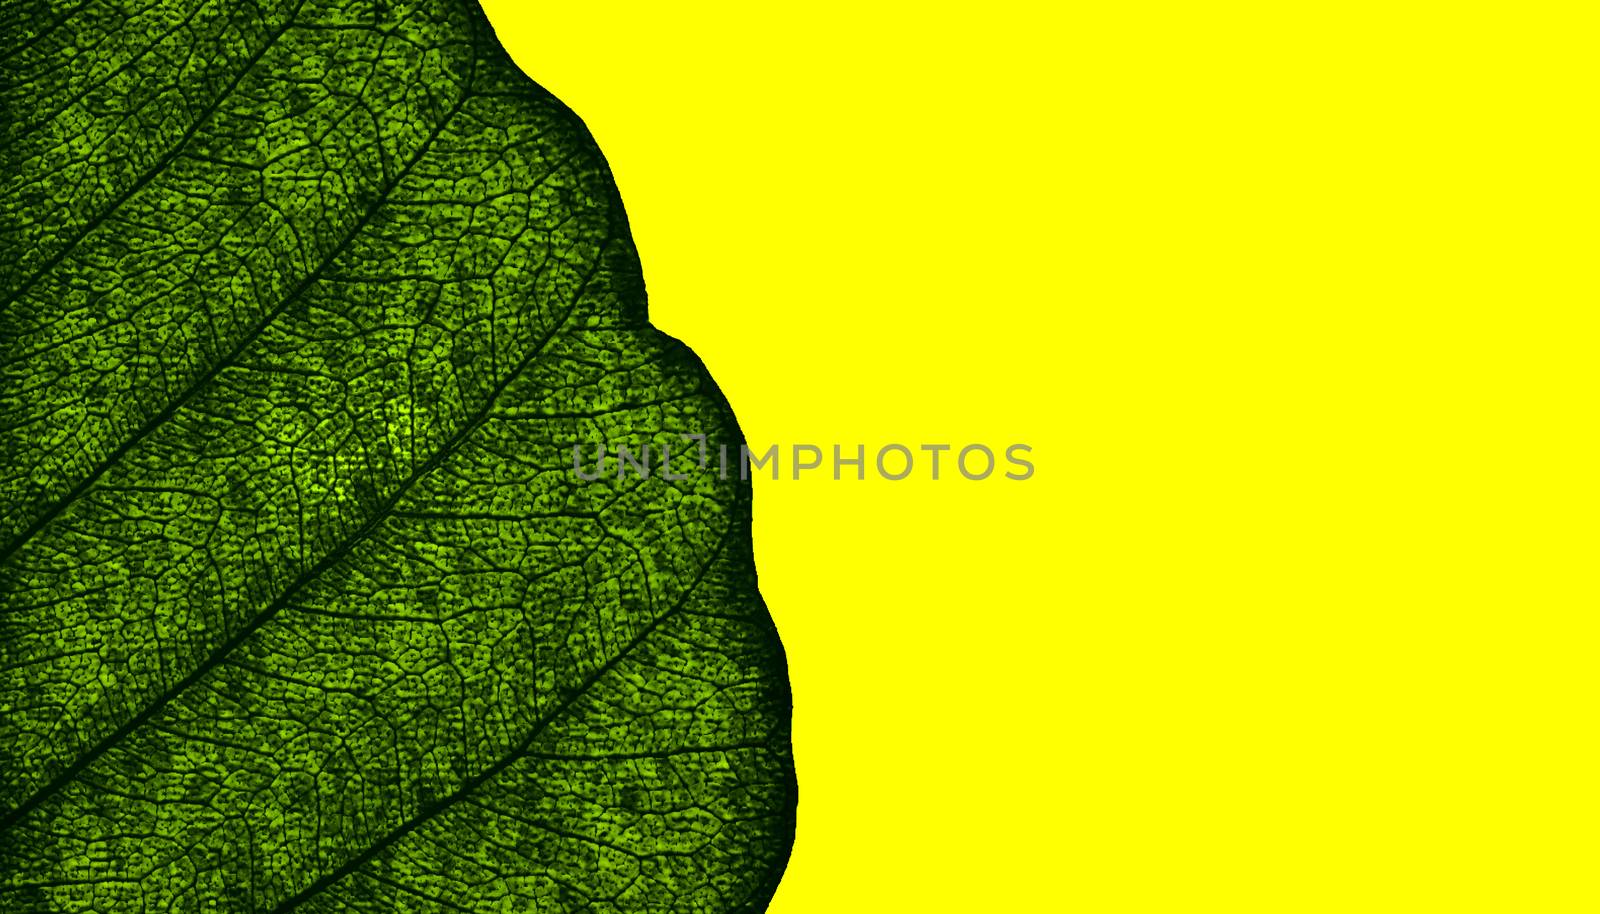 Leaf natural background concept close-up texture half 3d rendering abstract design isolated